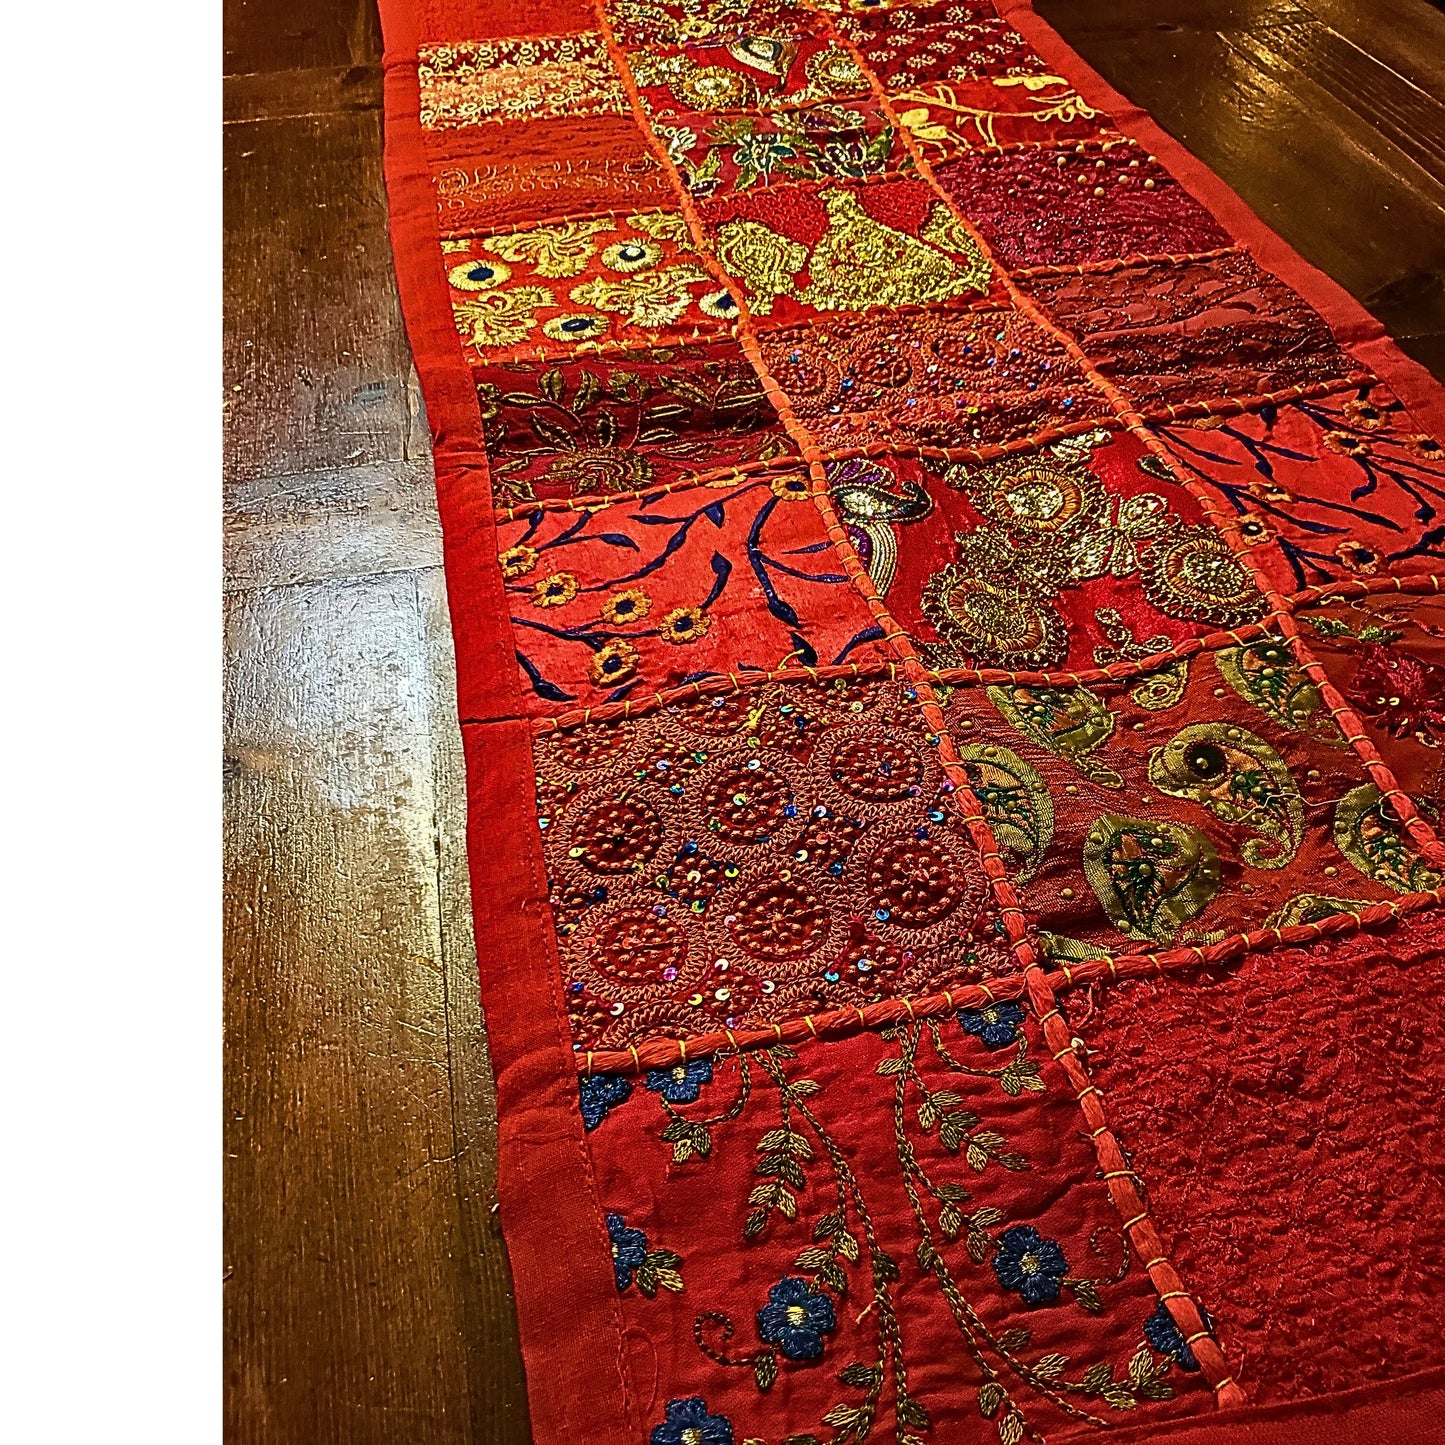 Handmade Gujarat Embroidered & Jeweled Table Runner & 6 Matching Placemats Set -Red Tones